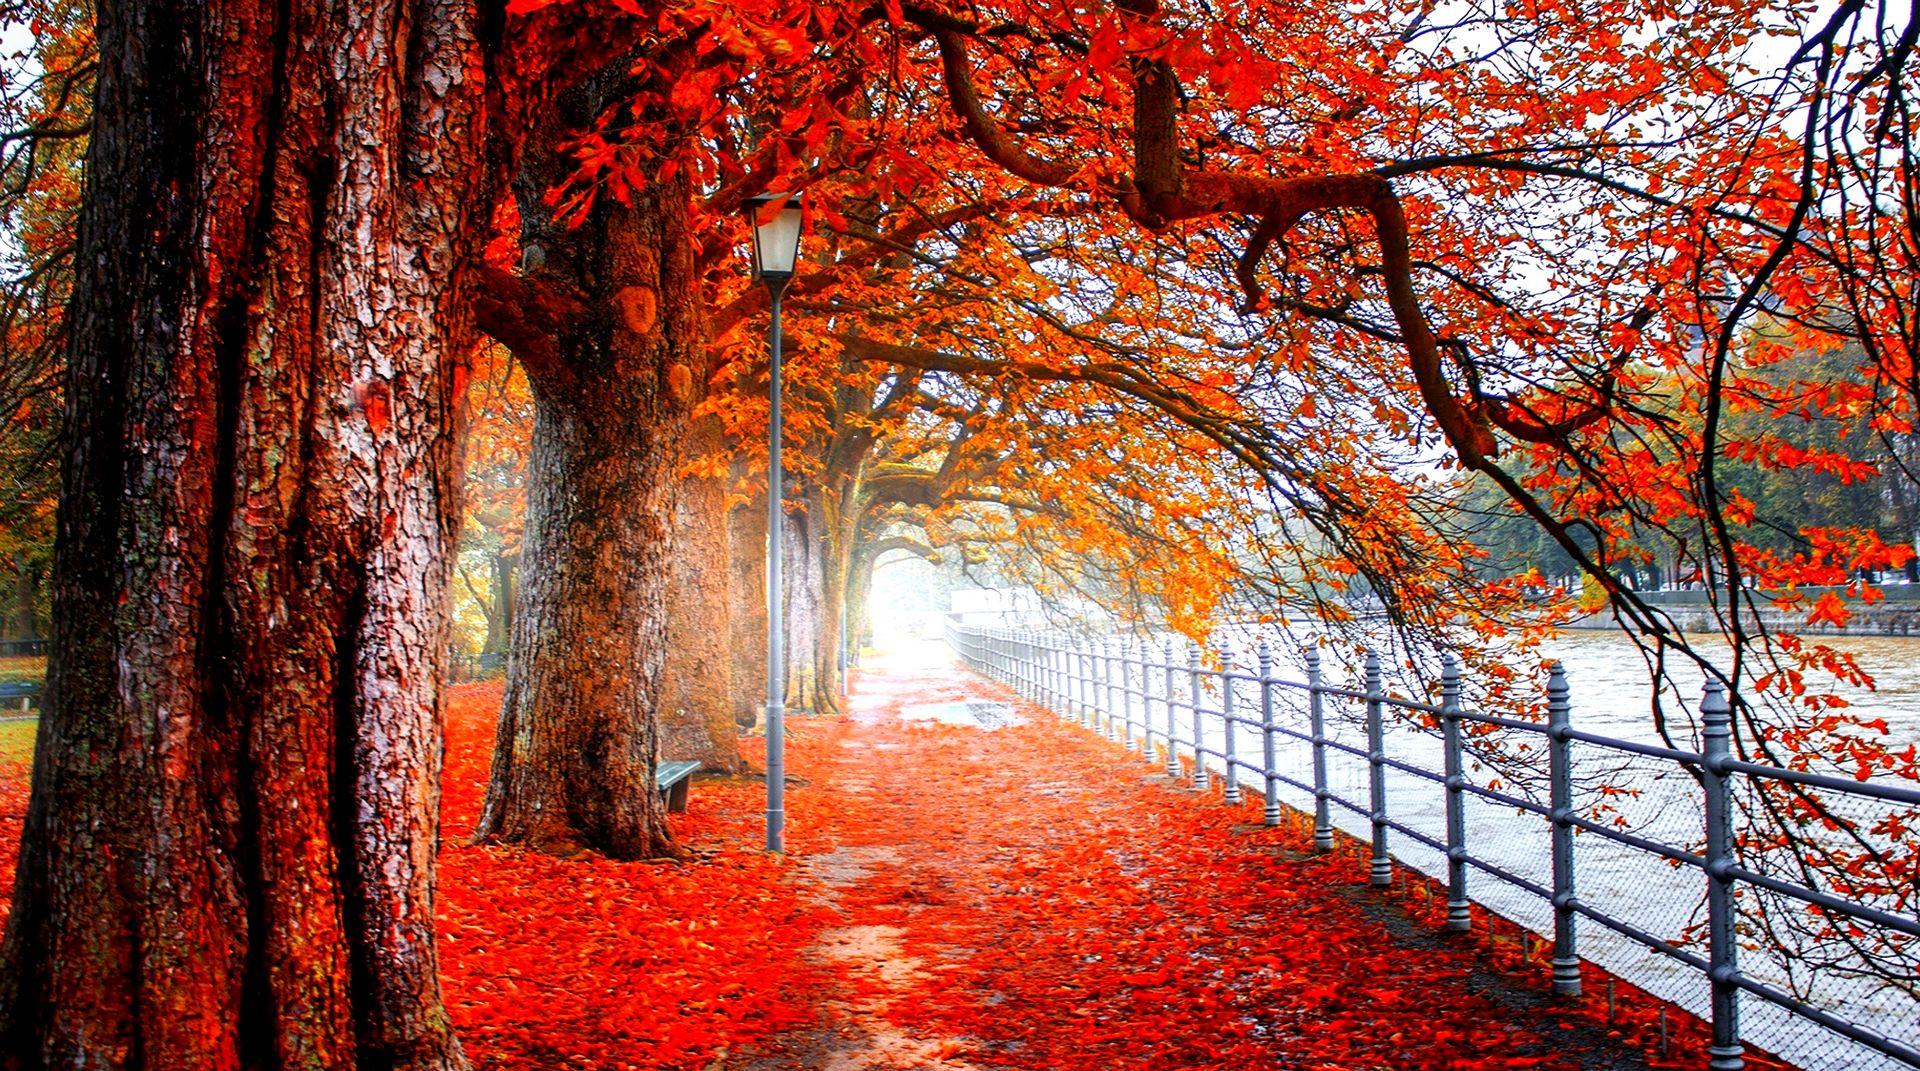 Red Tree 4k Wallpaper Anime Download. Red tree, Nature wallpaper